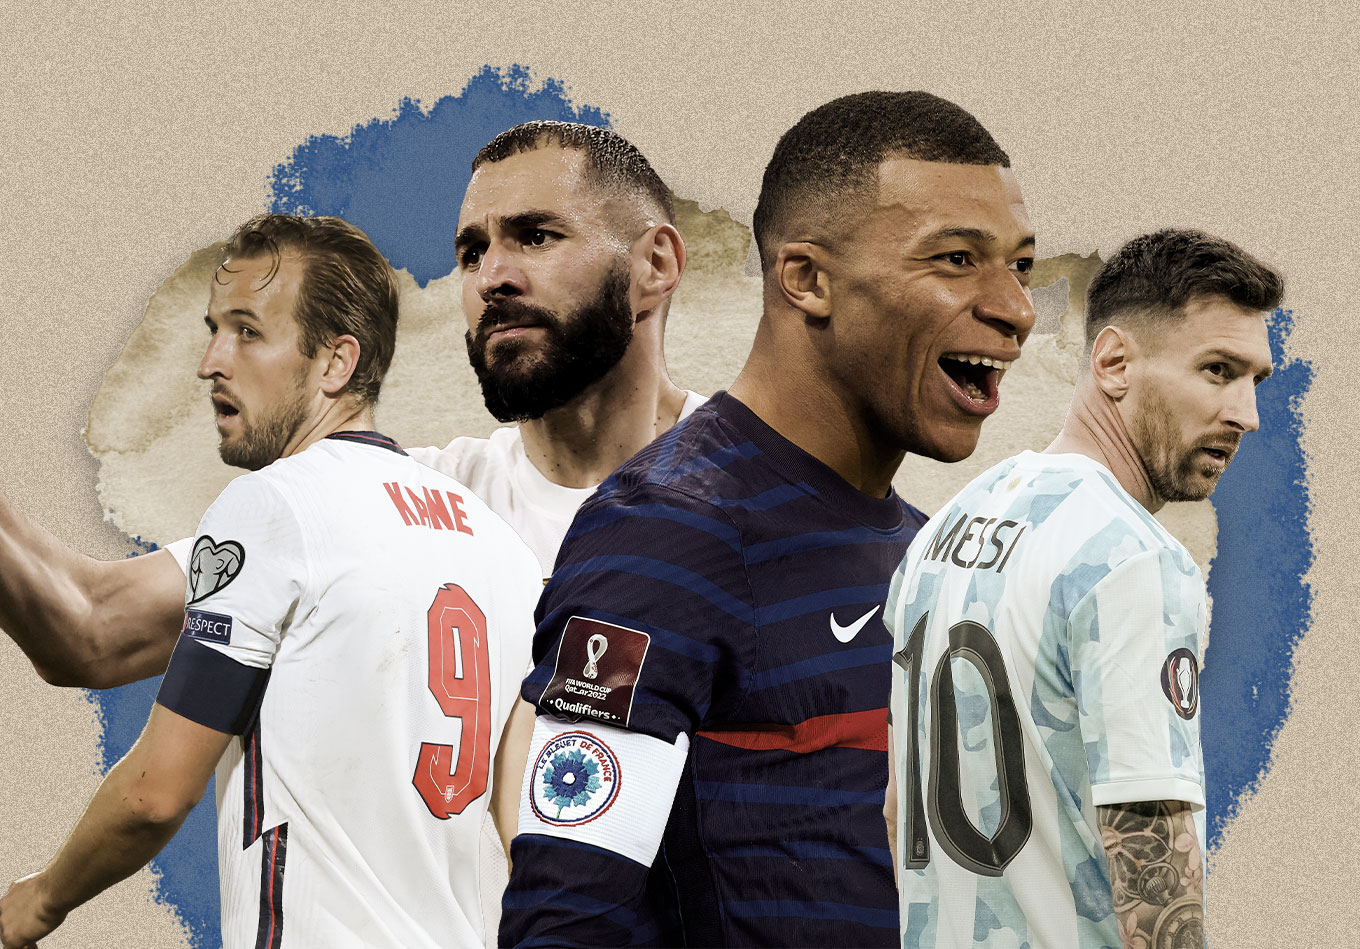 World Cup Golden Boot Favourites: Mbappe, Messi and Neymar in Form or Could Ronaldo Scoop Top Scorer Prize in 2022?